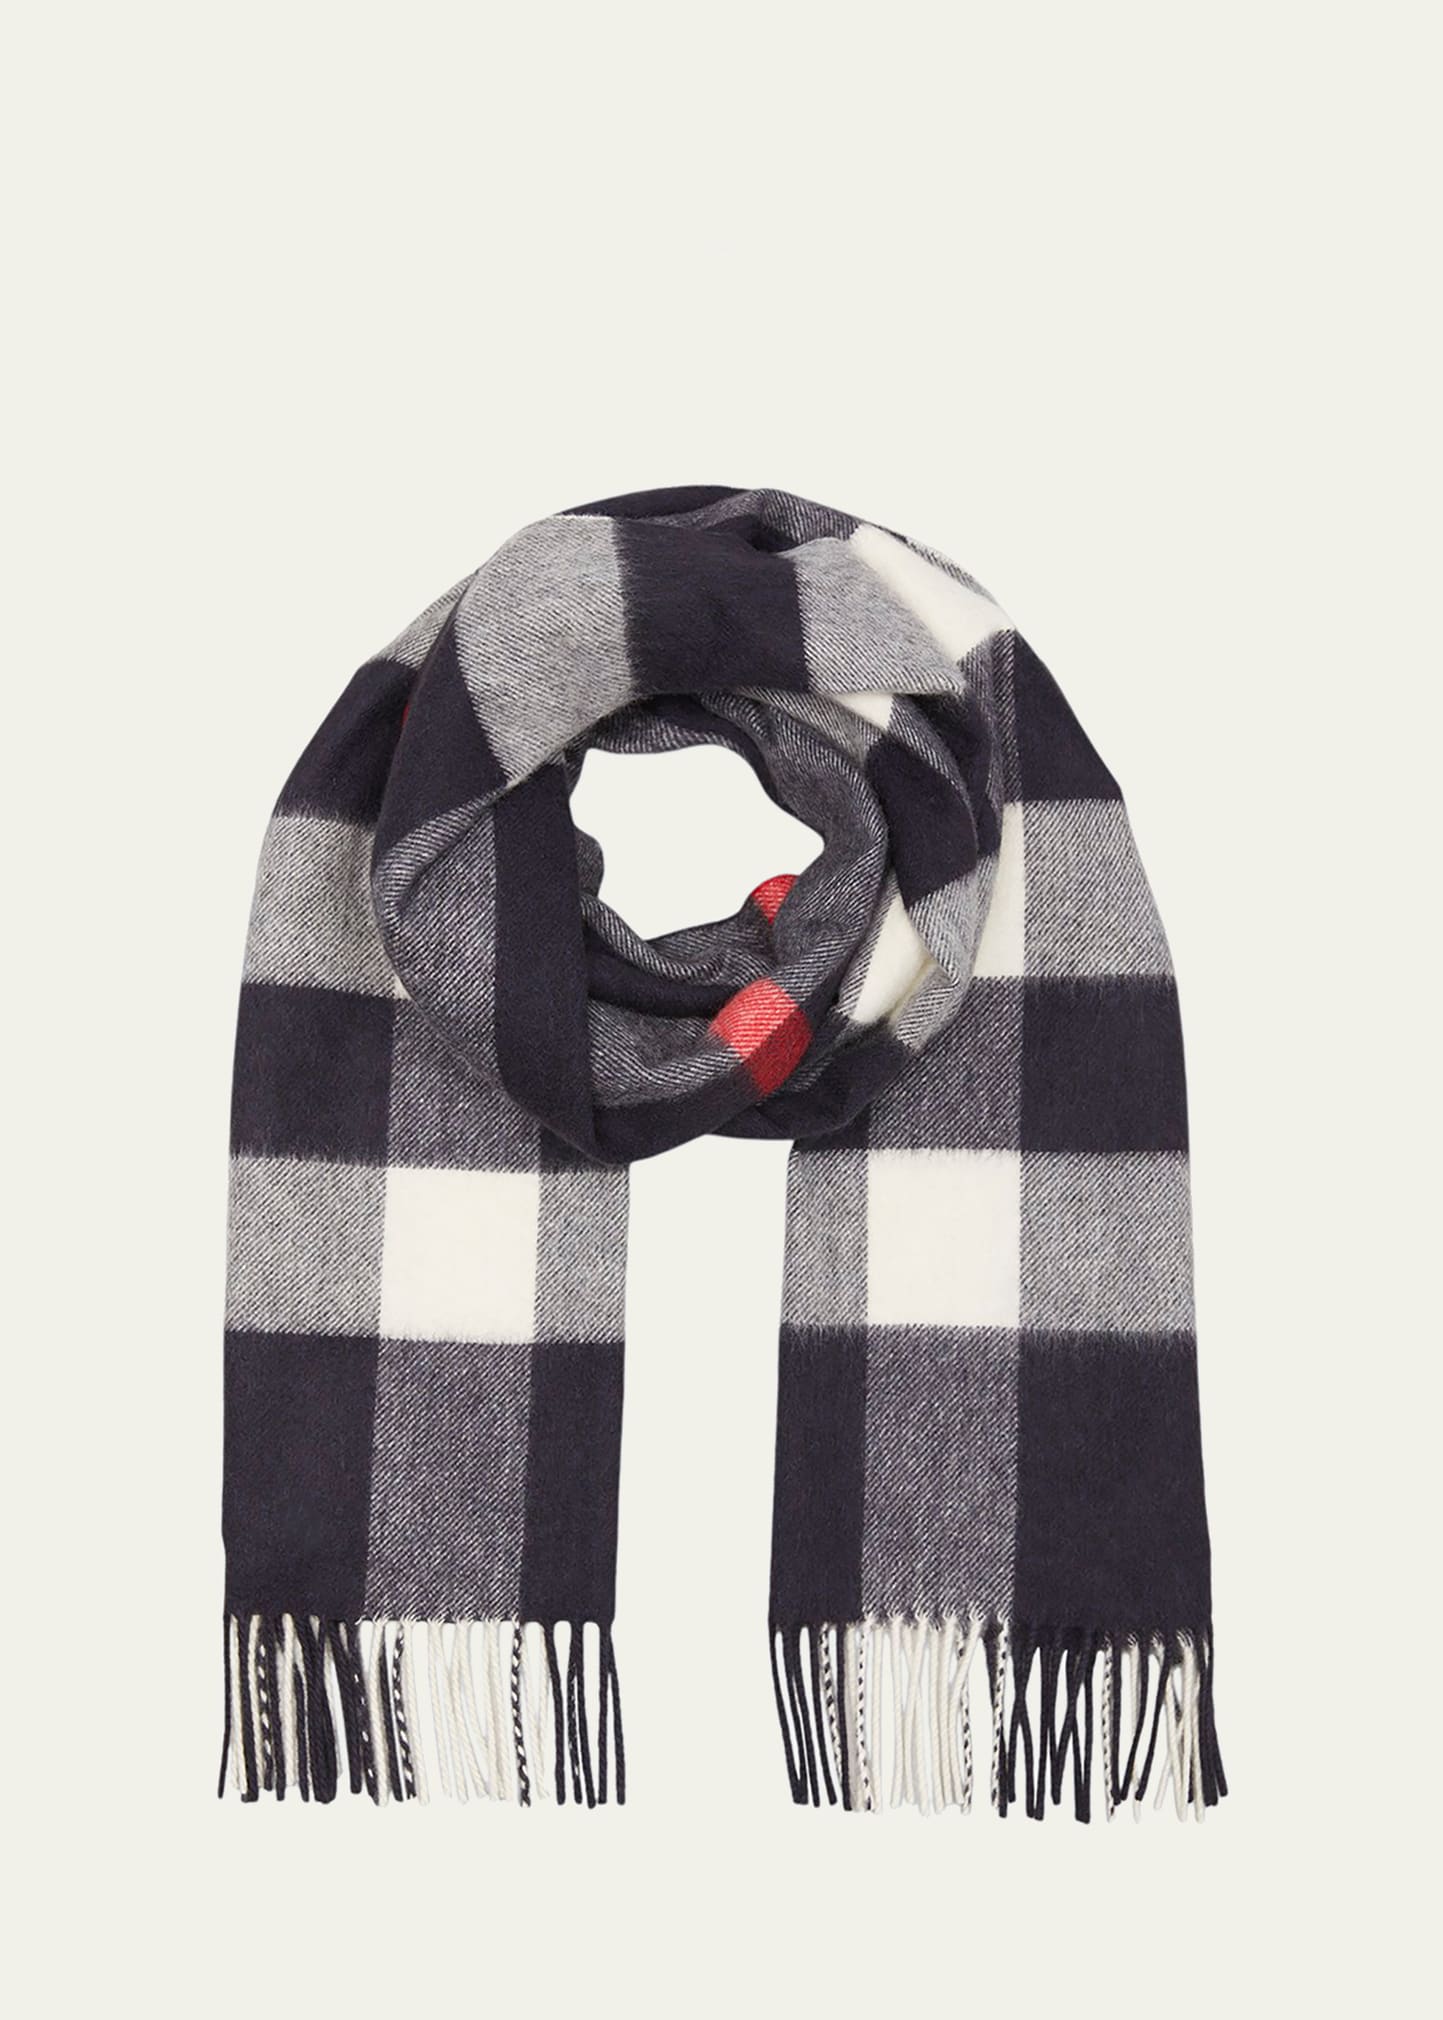 Burberry - Men - Reversible Fringed Checked Cashmere Scarf Black